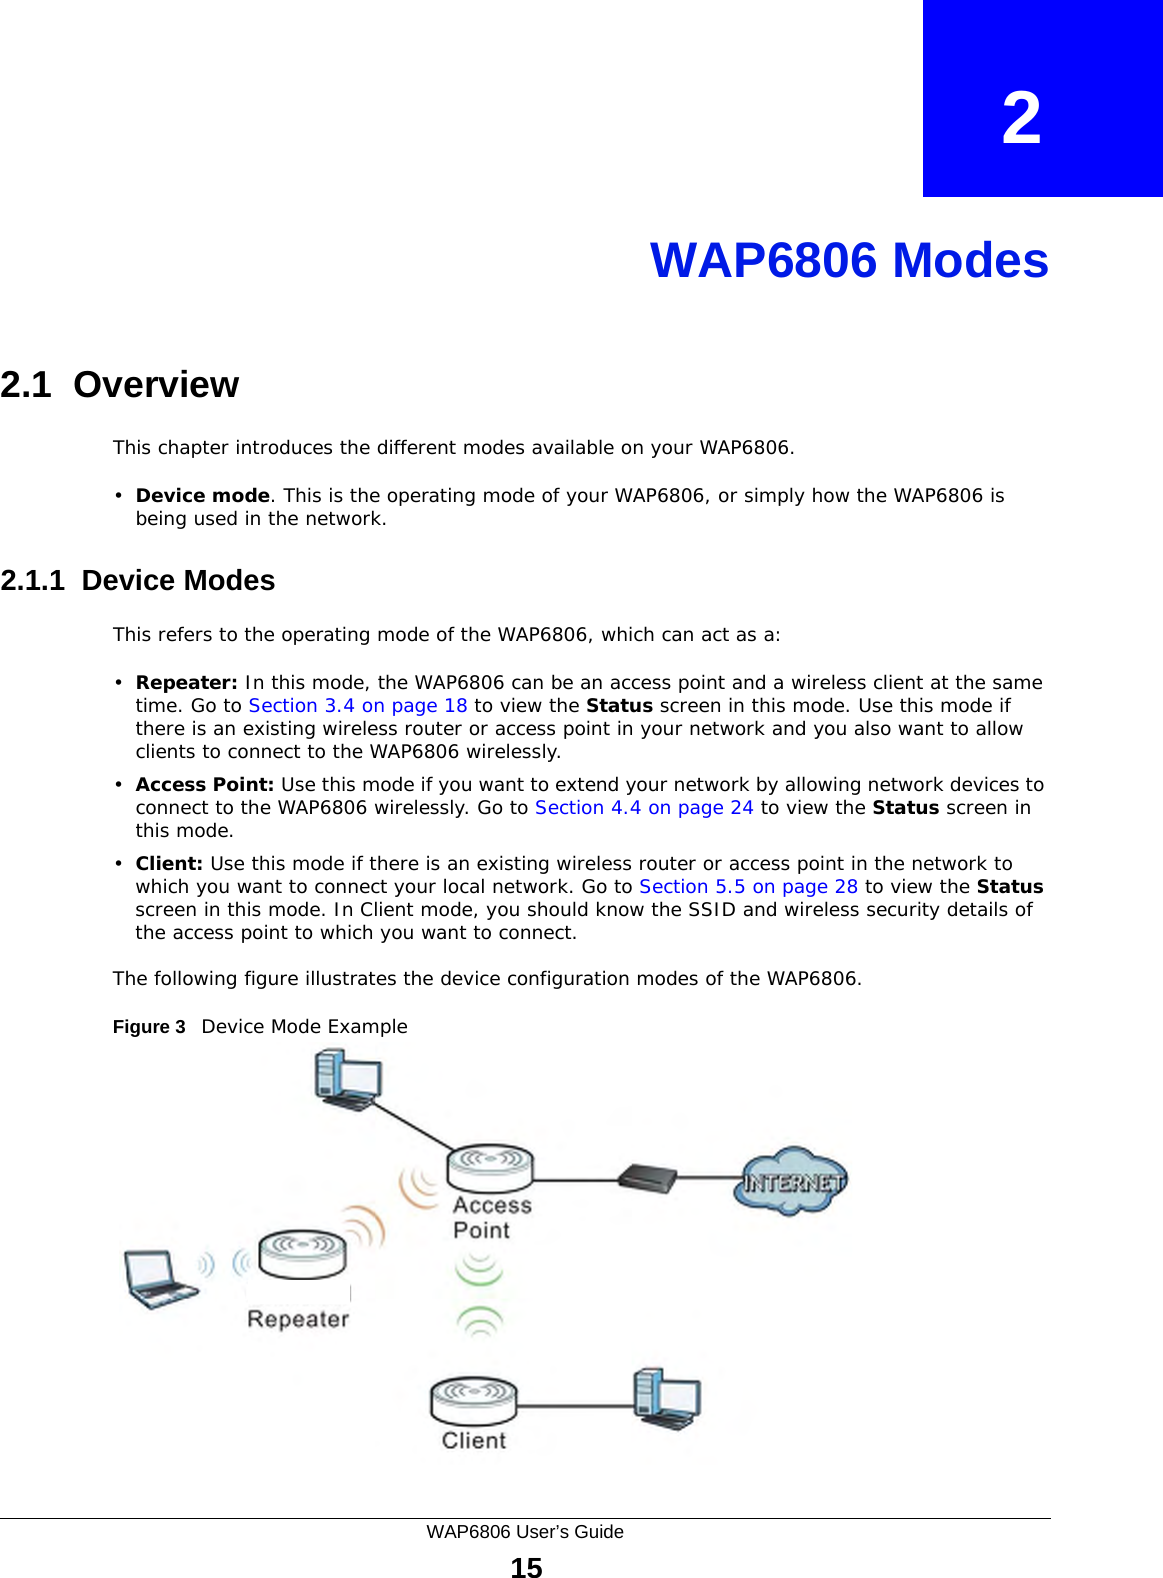 WAP6806 User’s Guide15CHAPTER   2WAP6806 Modes2.1  OverviewThis chapter introduces the different modes available on your WAP6806. •Device mode. This is the operating mode of your WAP6806, or simply how the WAP6806 is being used in the network. 2.1.1  Device ModesThis refers to the operating mode of the WAP6806, which can act as a:•Repeater: In this mode, the WAP6806 can be an access point and a wireless client at the same time. Go to Section 3.4 on page 18 to view the Status screen in this mode. Use this mode if there is an existing wireless router or access point in your network and you also want to allow clients to connect to the WAP6806 wirelessly. •Access Point: Use this mode if you want to extend your network by allowing network devices to connect to the WAP6806 wirelessly. Go to Section 4.4 on page 24 to view the Status screen in this mode. •Client: Use this mode if there is an existing wireless router or access point in the network to which you want to connect your local network. Go to Section 5.5 on page 28 to view the Status screen in this mode. In Client mode, you should know the SSID and wireless security details of the access point to which you want to connect.The following figure illustrates the device configuration modes of the WAP6806.Figure 3   Device Mode Example 